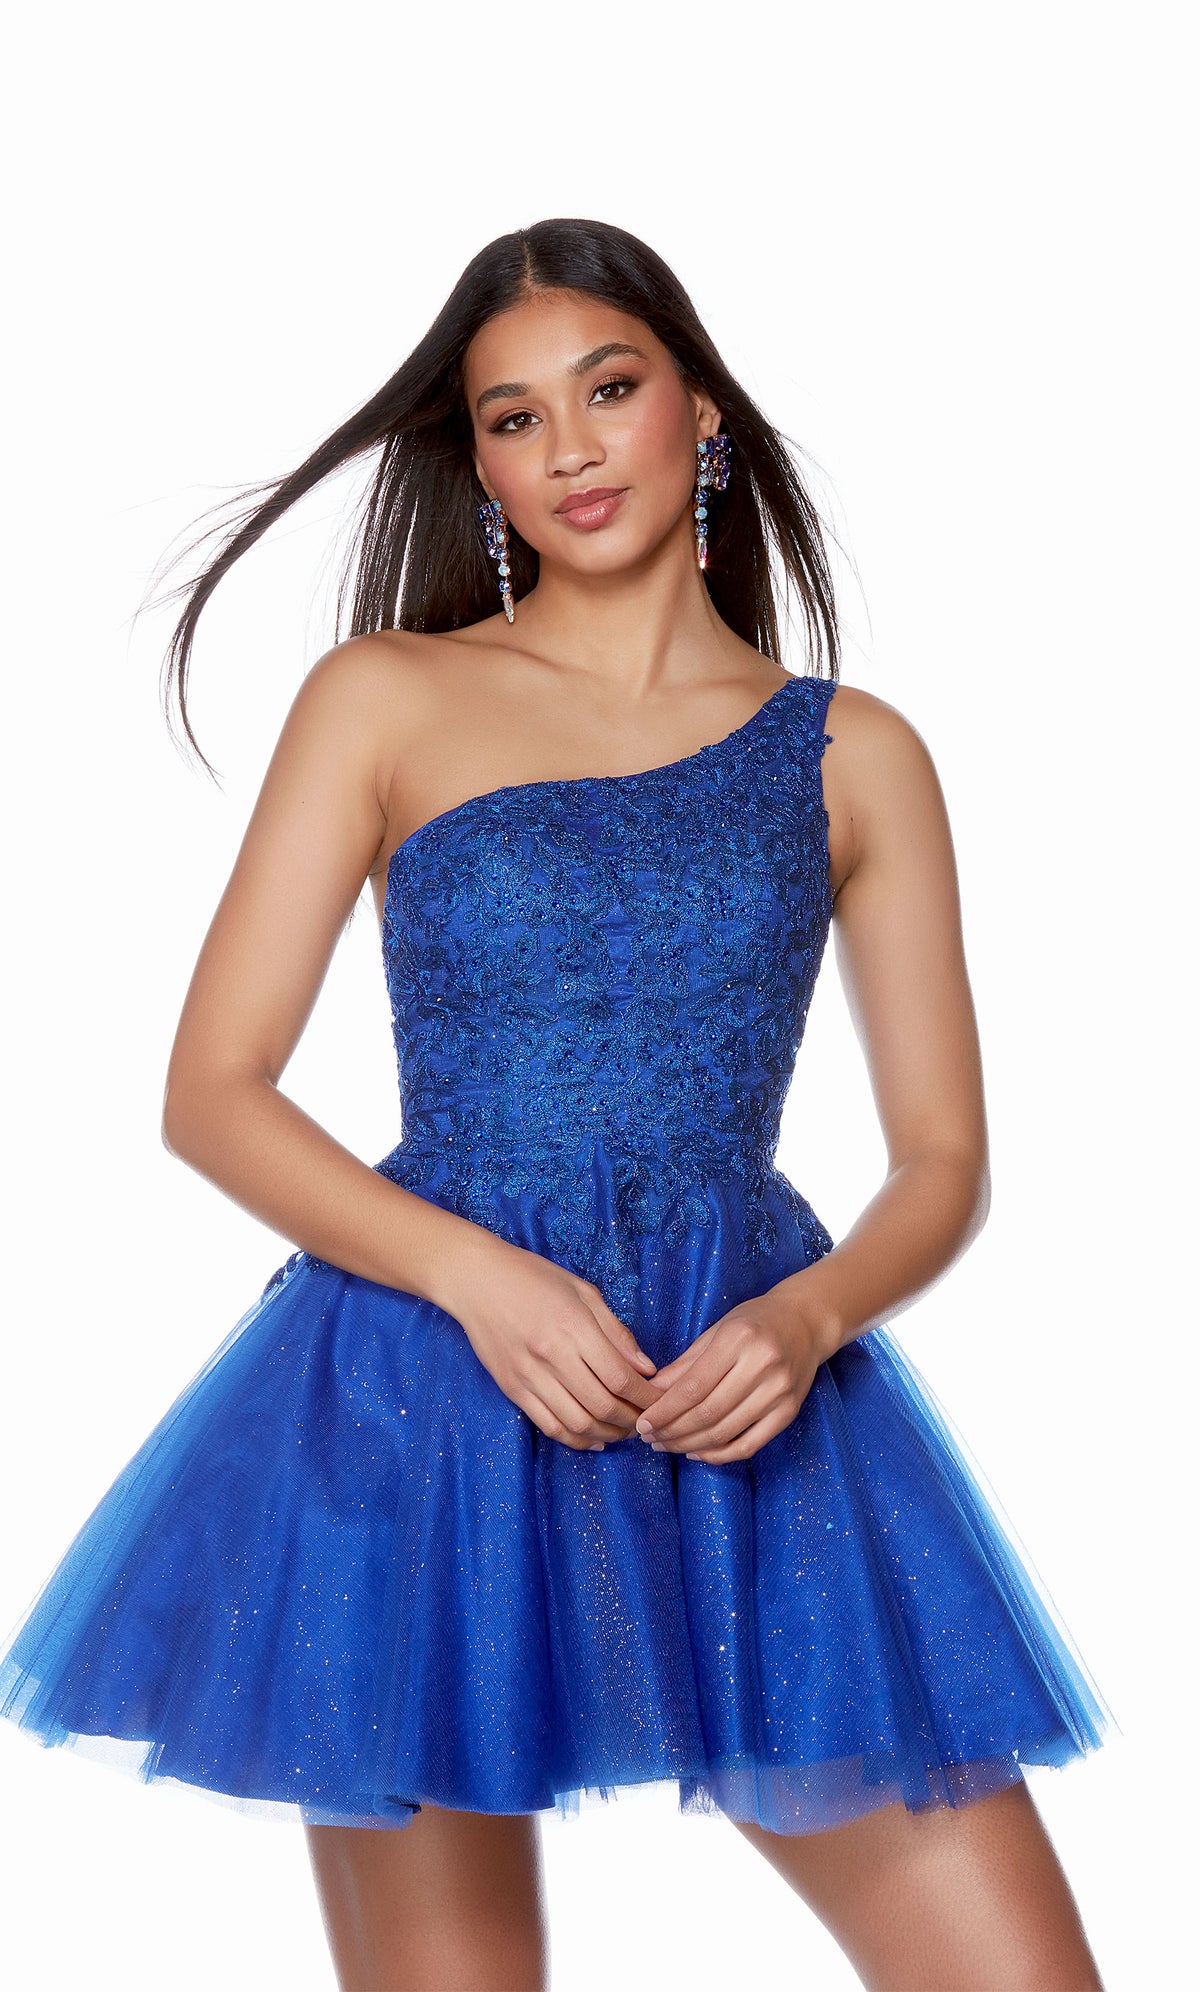 A royal blue, one-shoulder short formal dress with a delicate lace bodice and a full glitter tulle skirt.